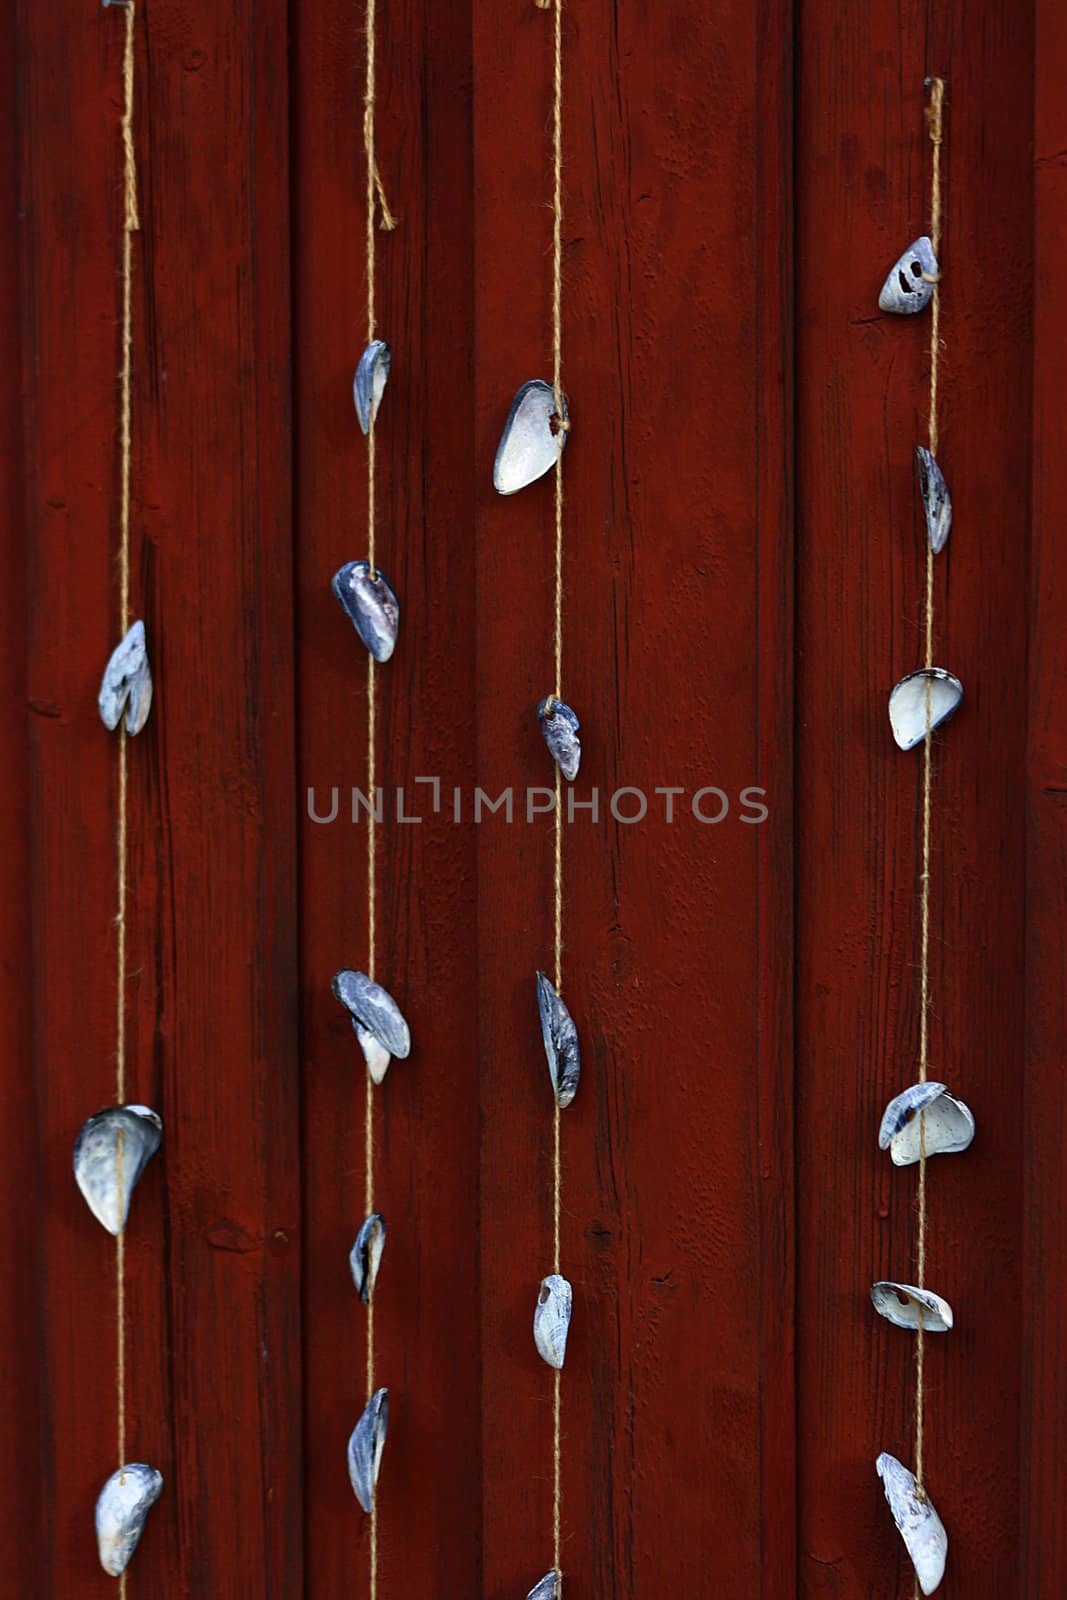 Decorative blue mussels attached to strings hanging on red wooden wall